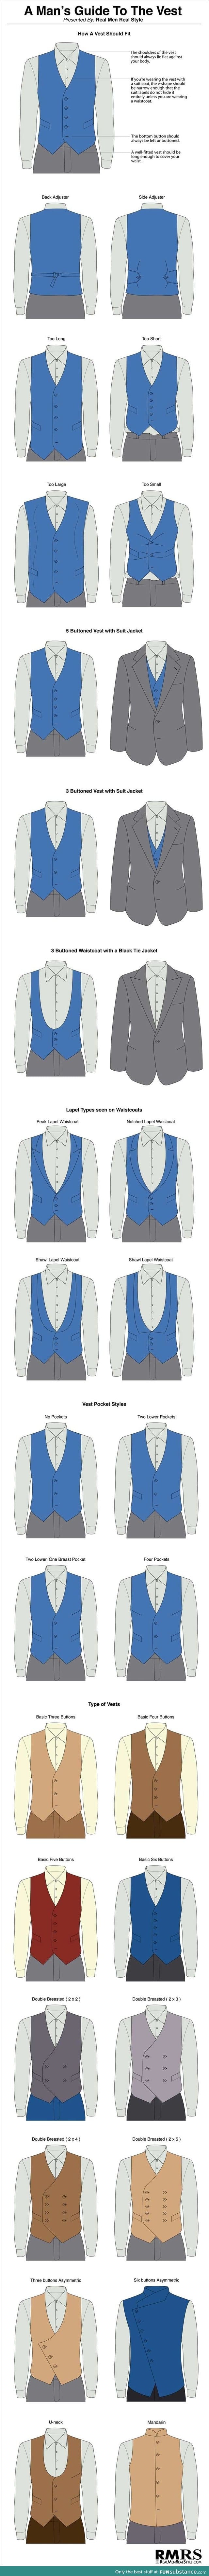 A man's guide to the vest